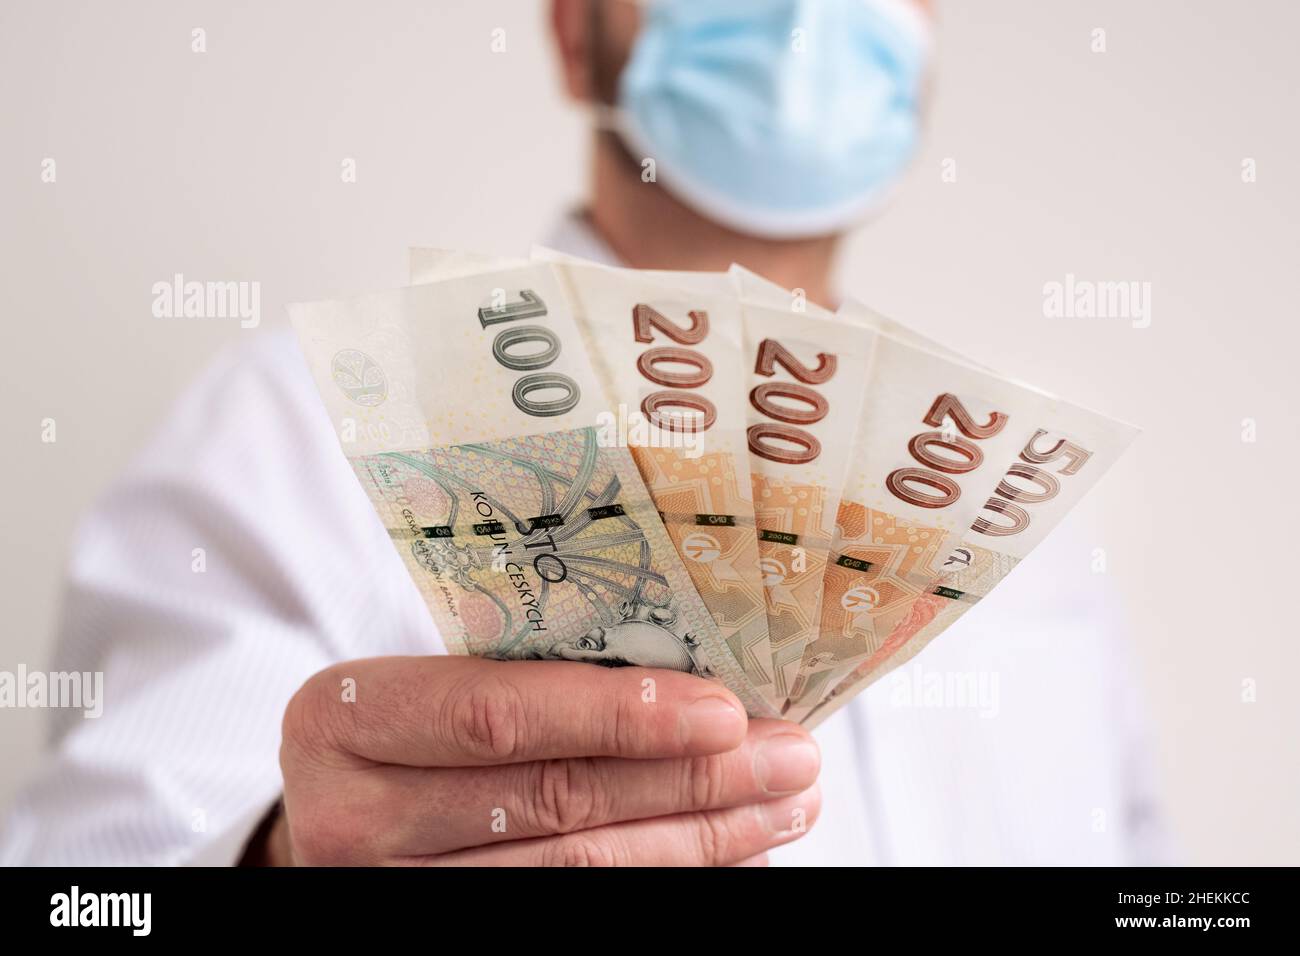 Fan of Cash Czech republic koruna. Finance during coronavirus in Czechia concept. CZK small banknotes. Man in a protective medical face mask holds kro Stock Photo